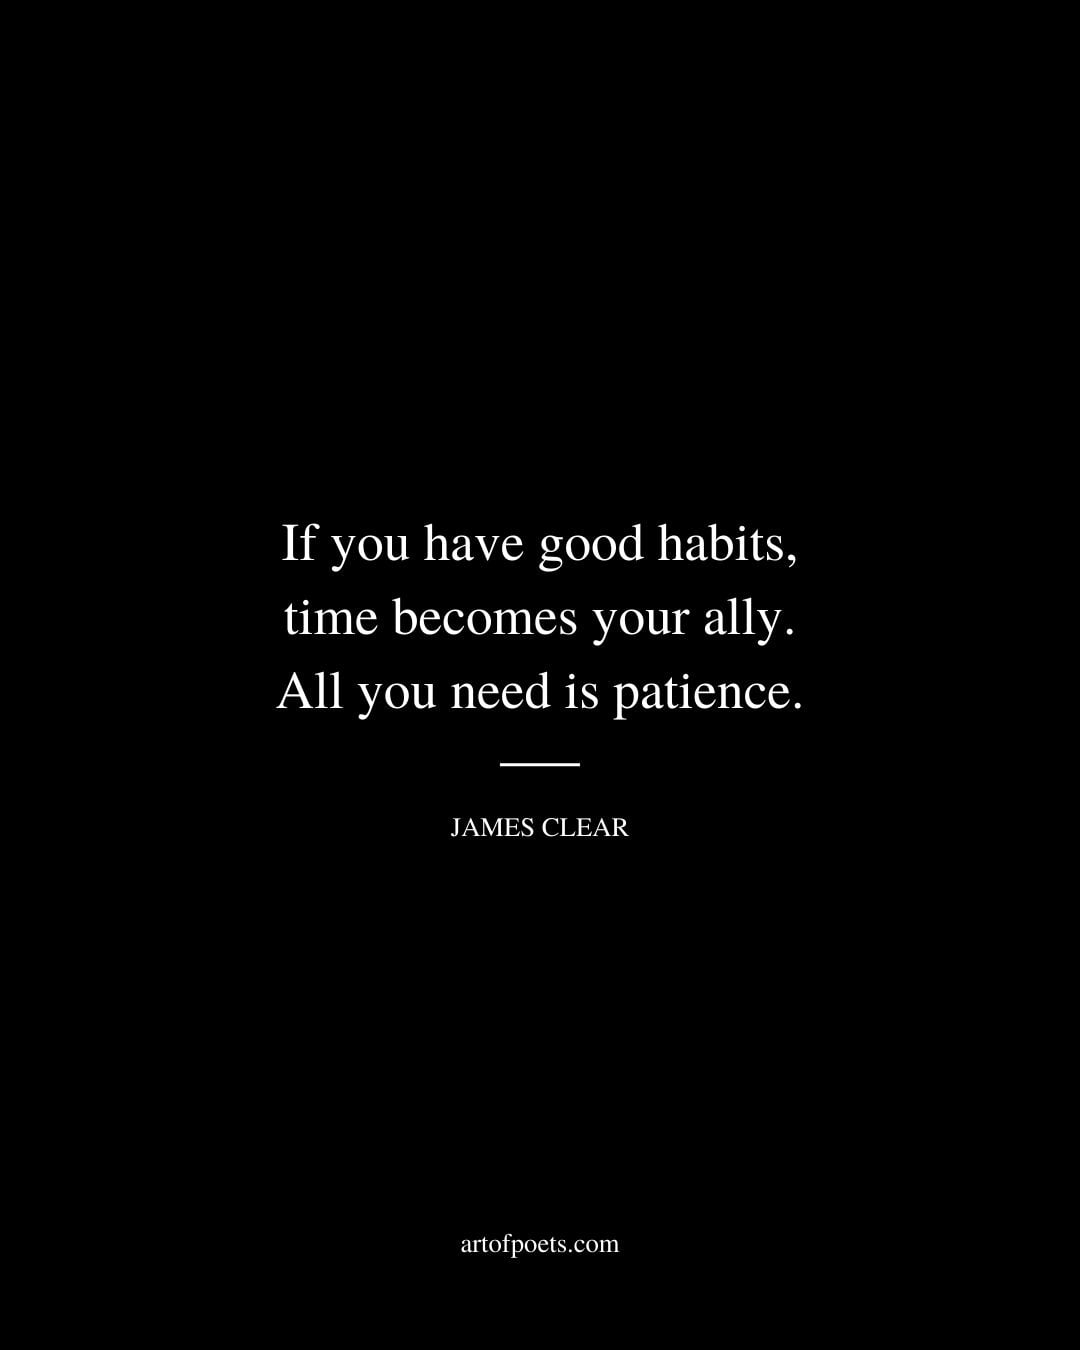 if you have good habits time becomes your ally. All you need is patience